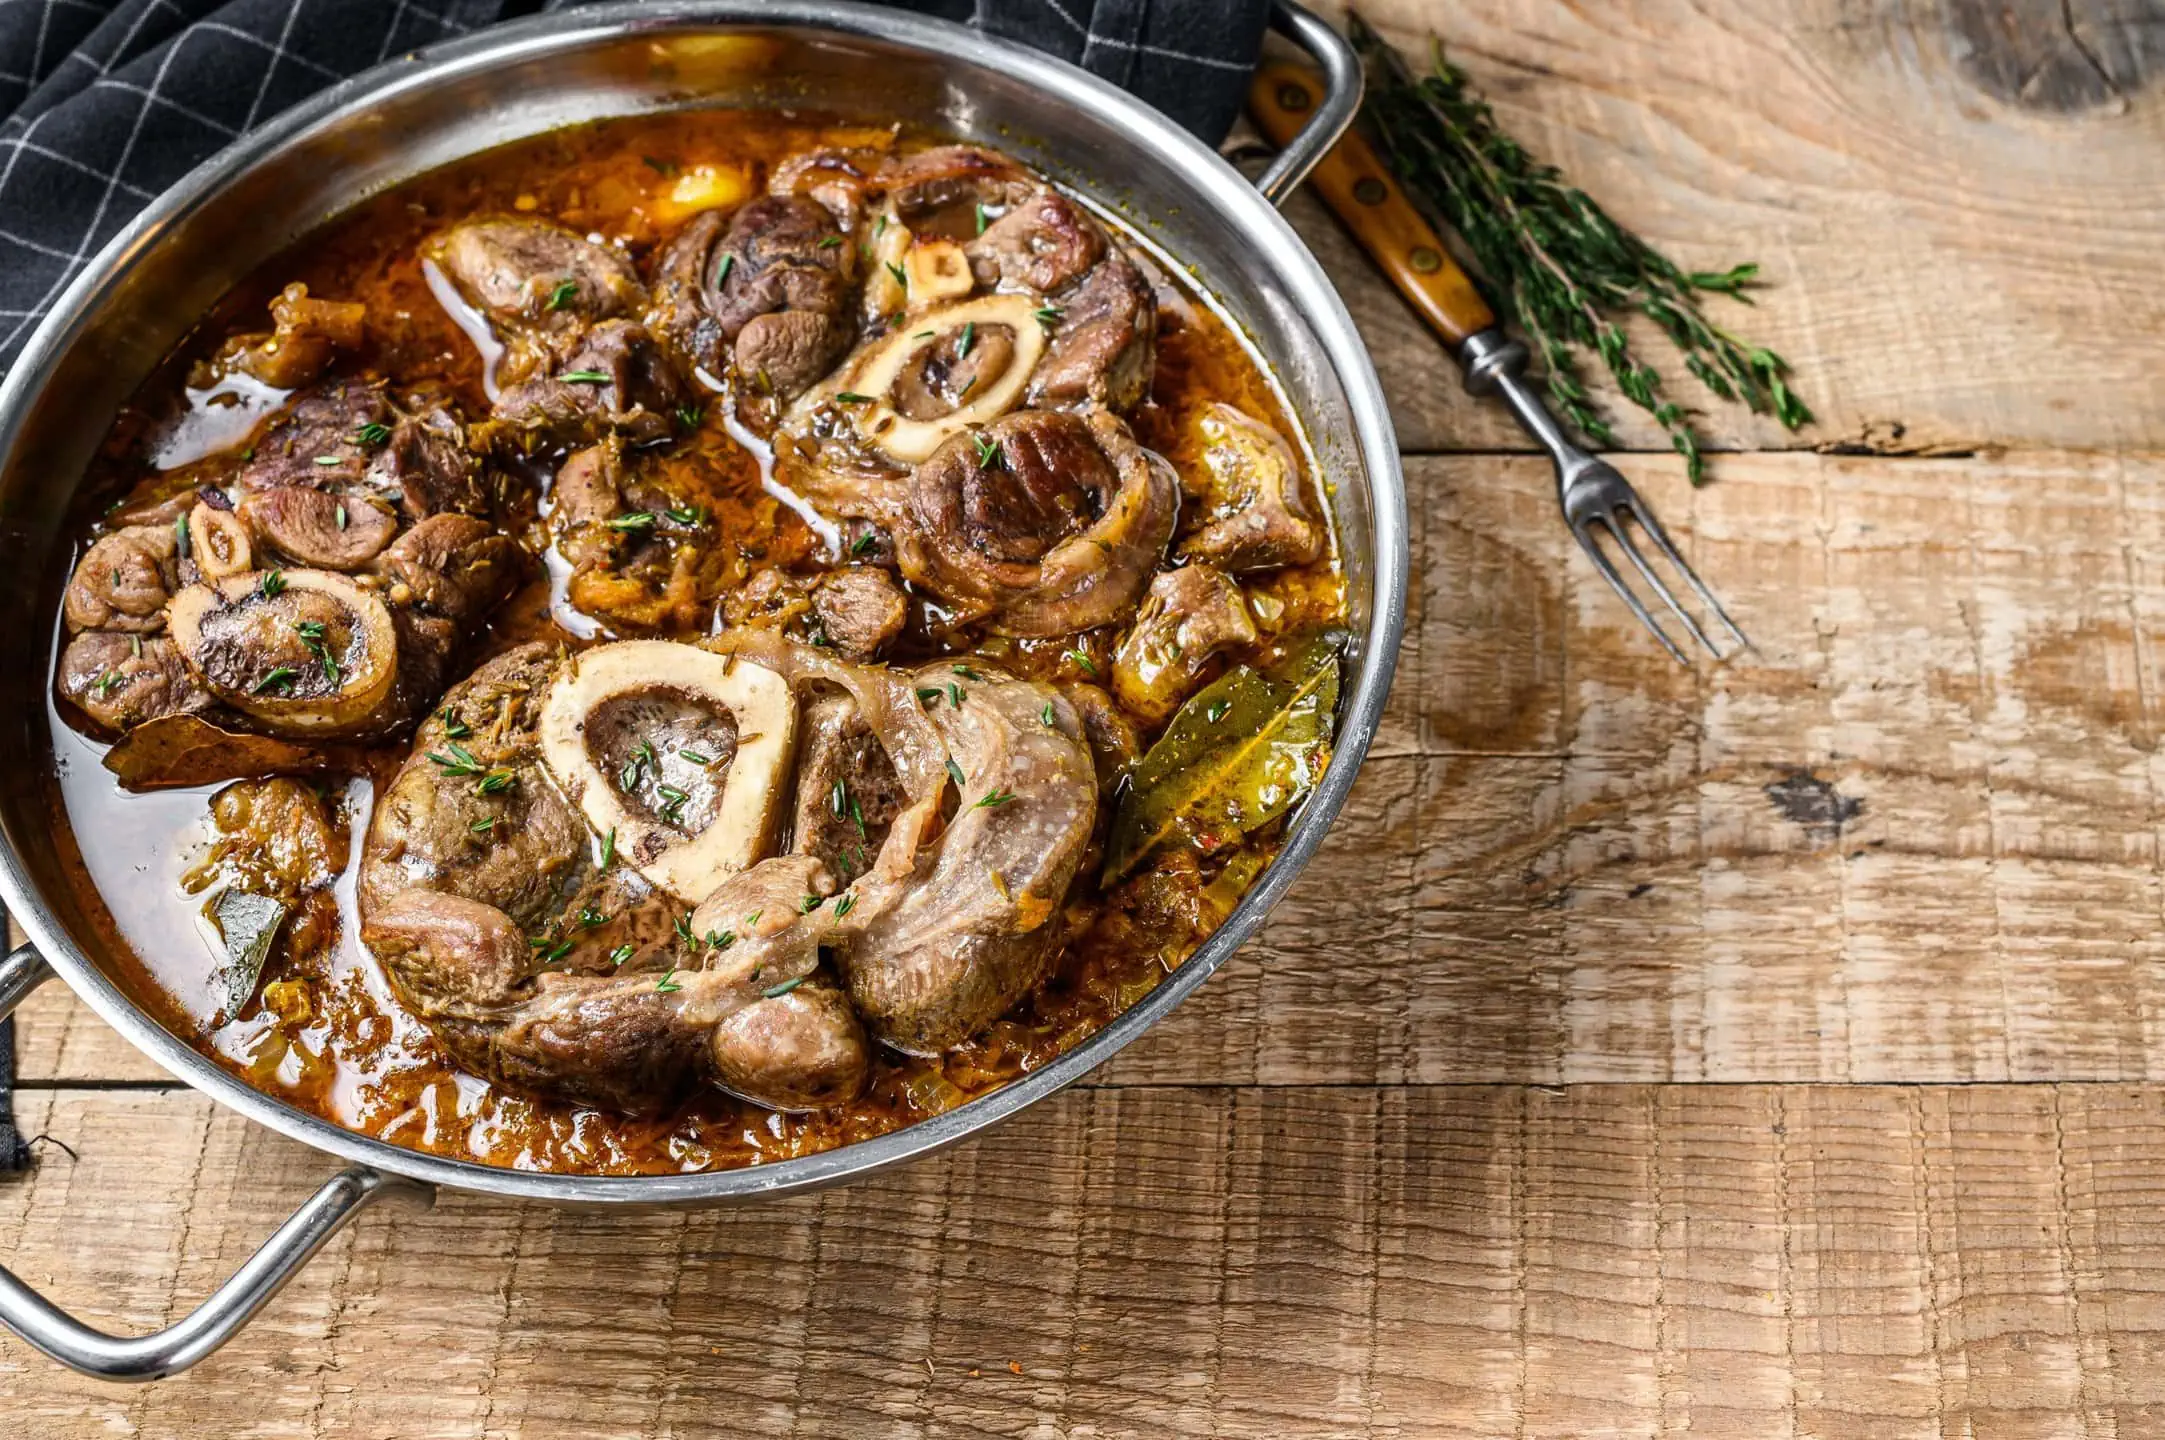 Ina Garten's osso buco recipe with vegetables and herbs